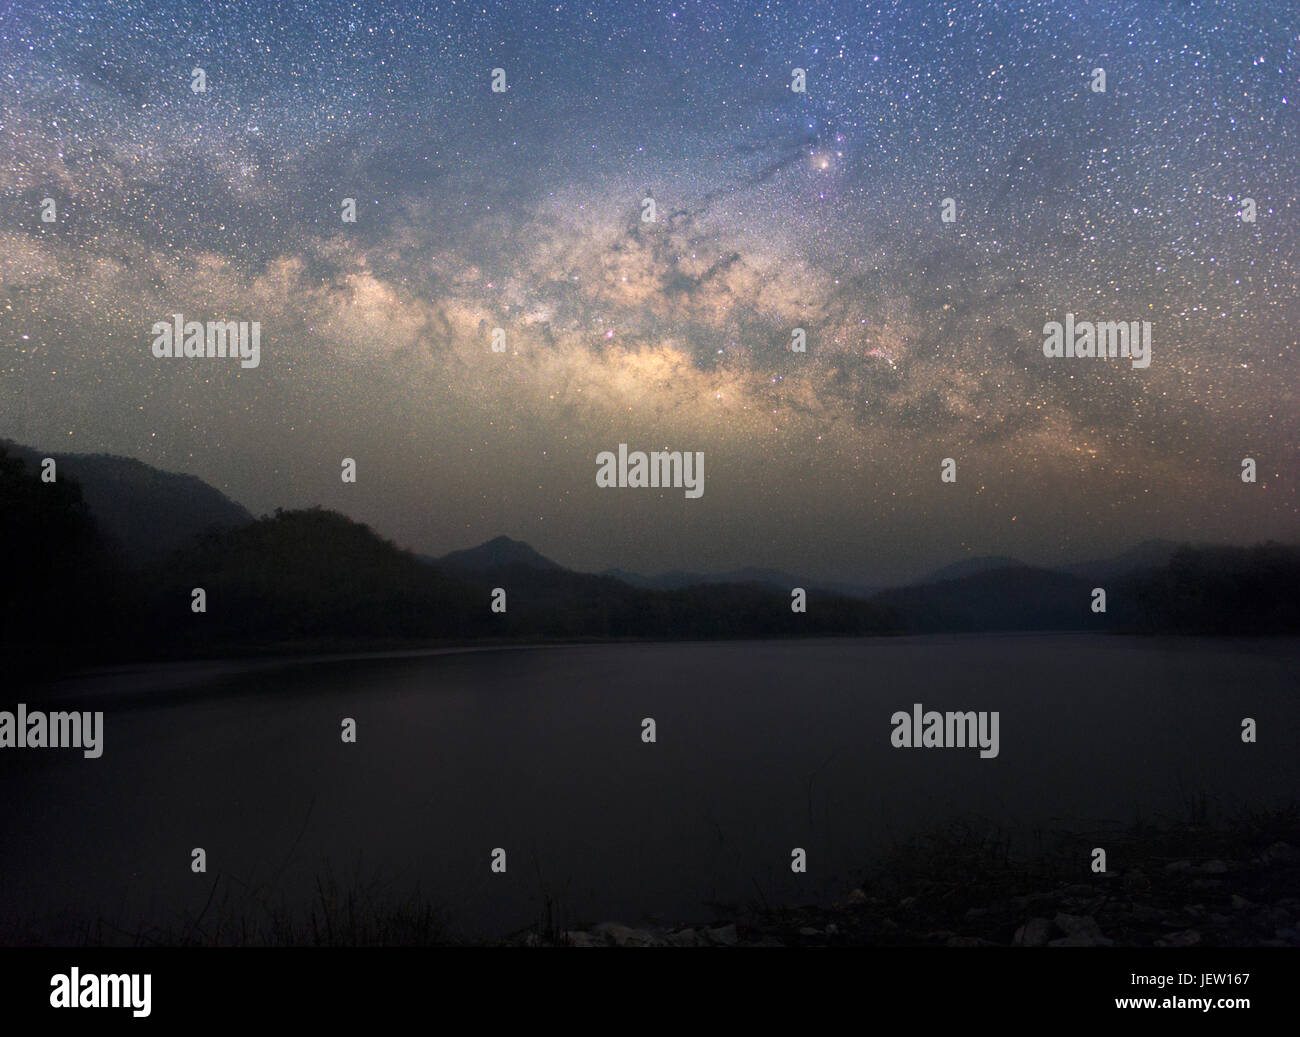 Beautiful Night Starry sky with Rising Milky Way over the mountain, Thailand Stock Photo